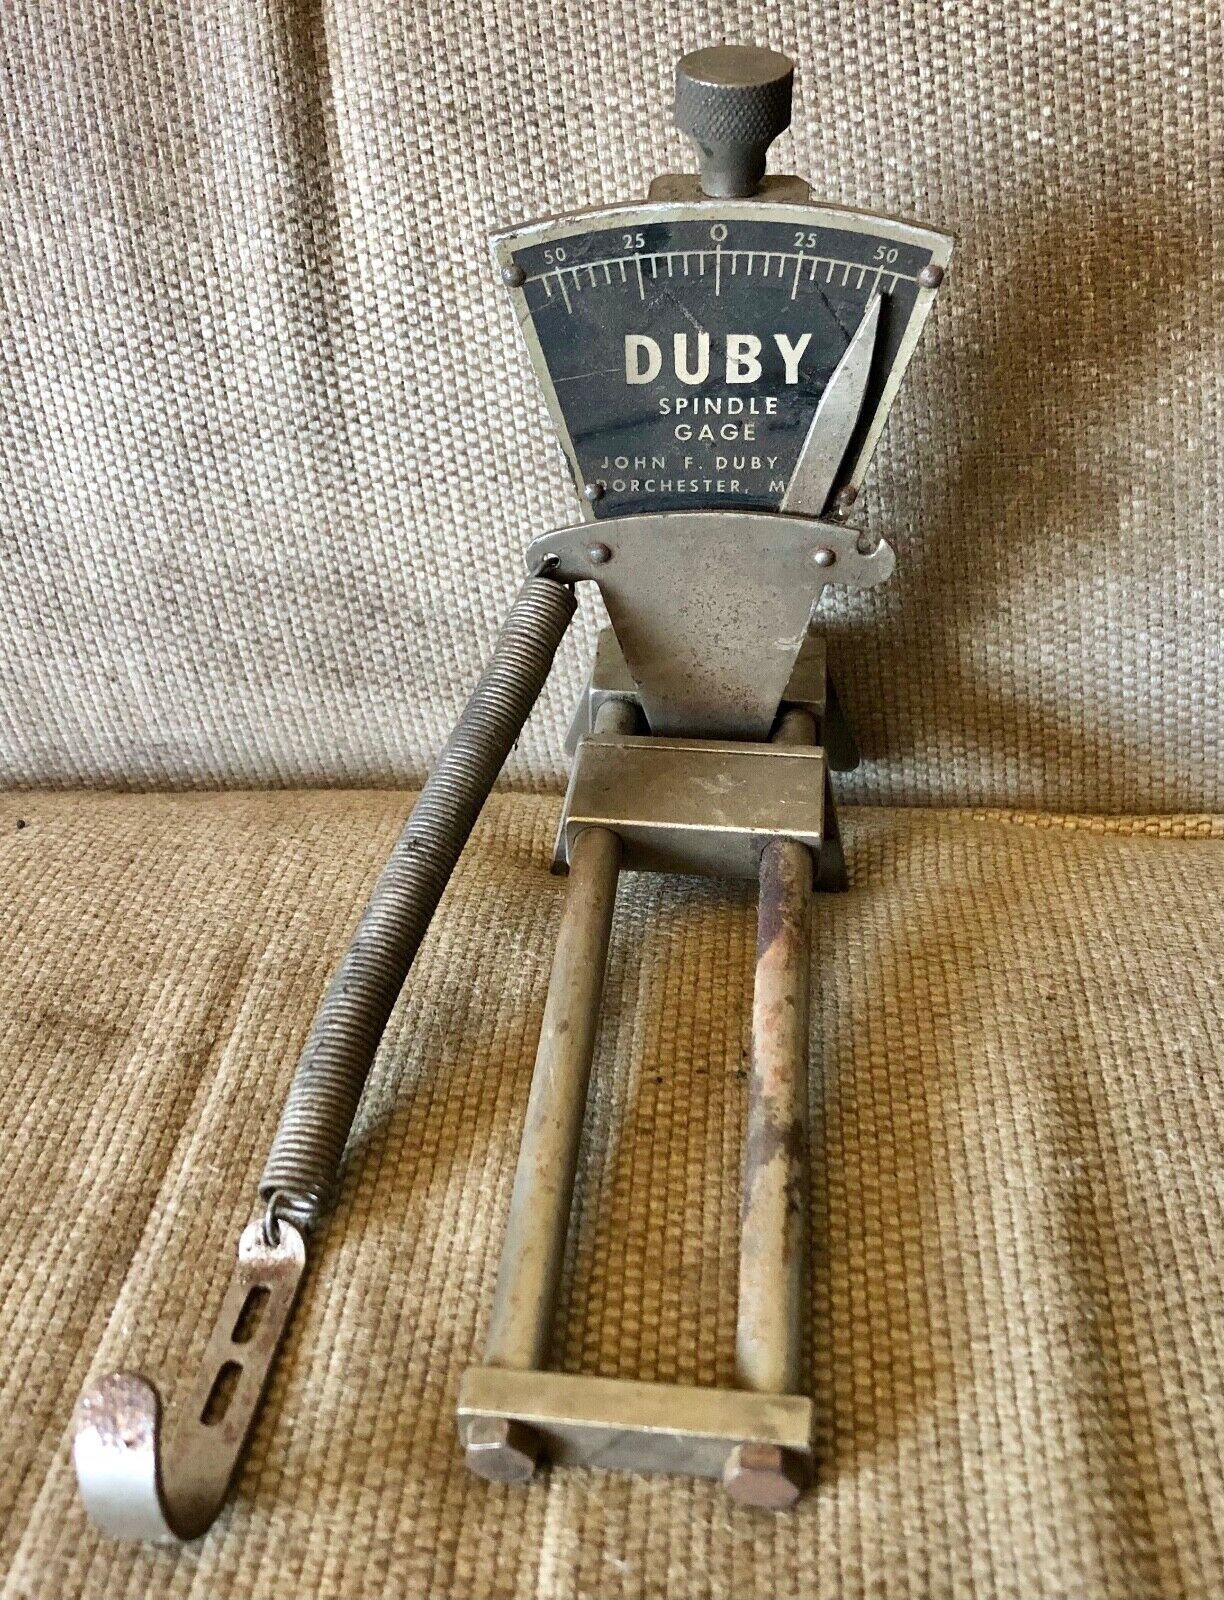 Vintage John F. Duby Spindle Gage Alignment Tool - USA